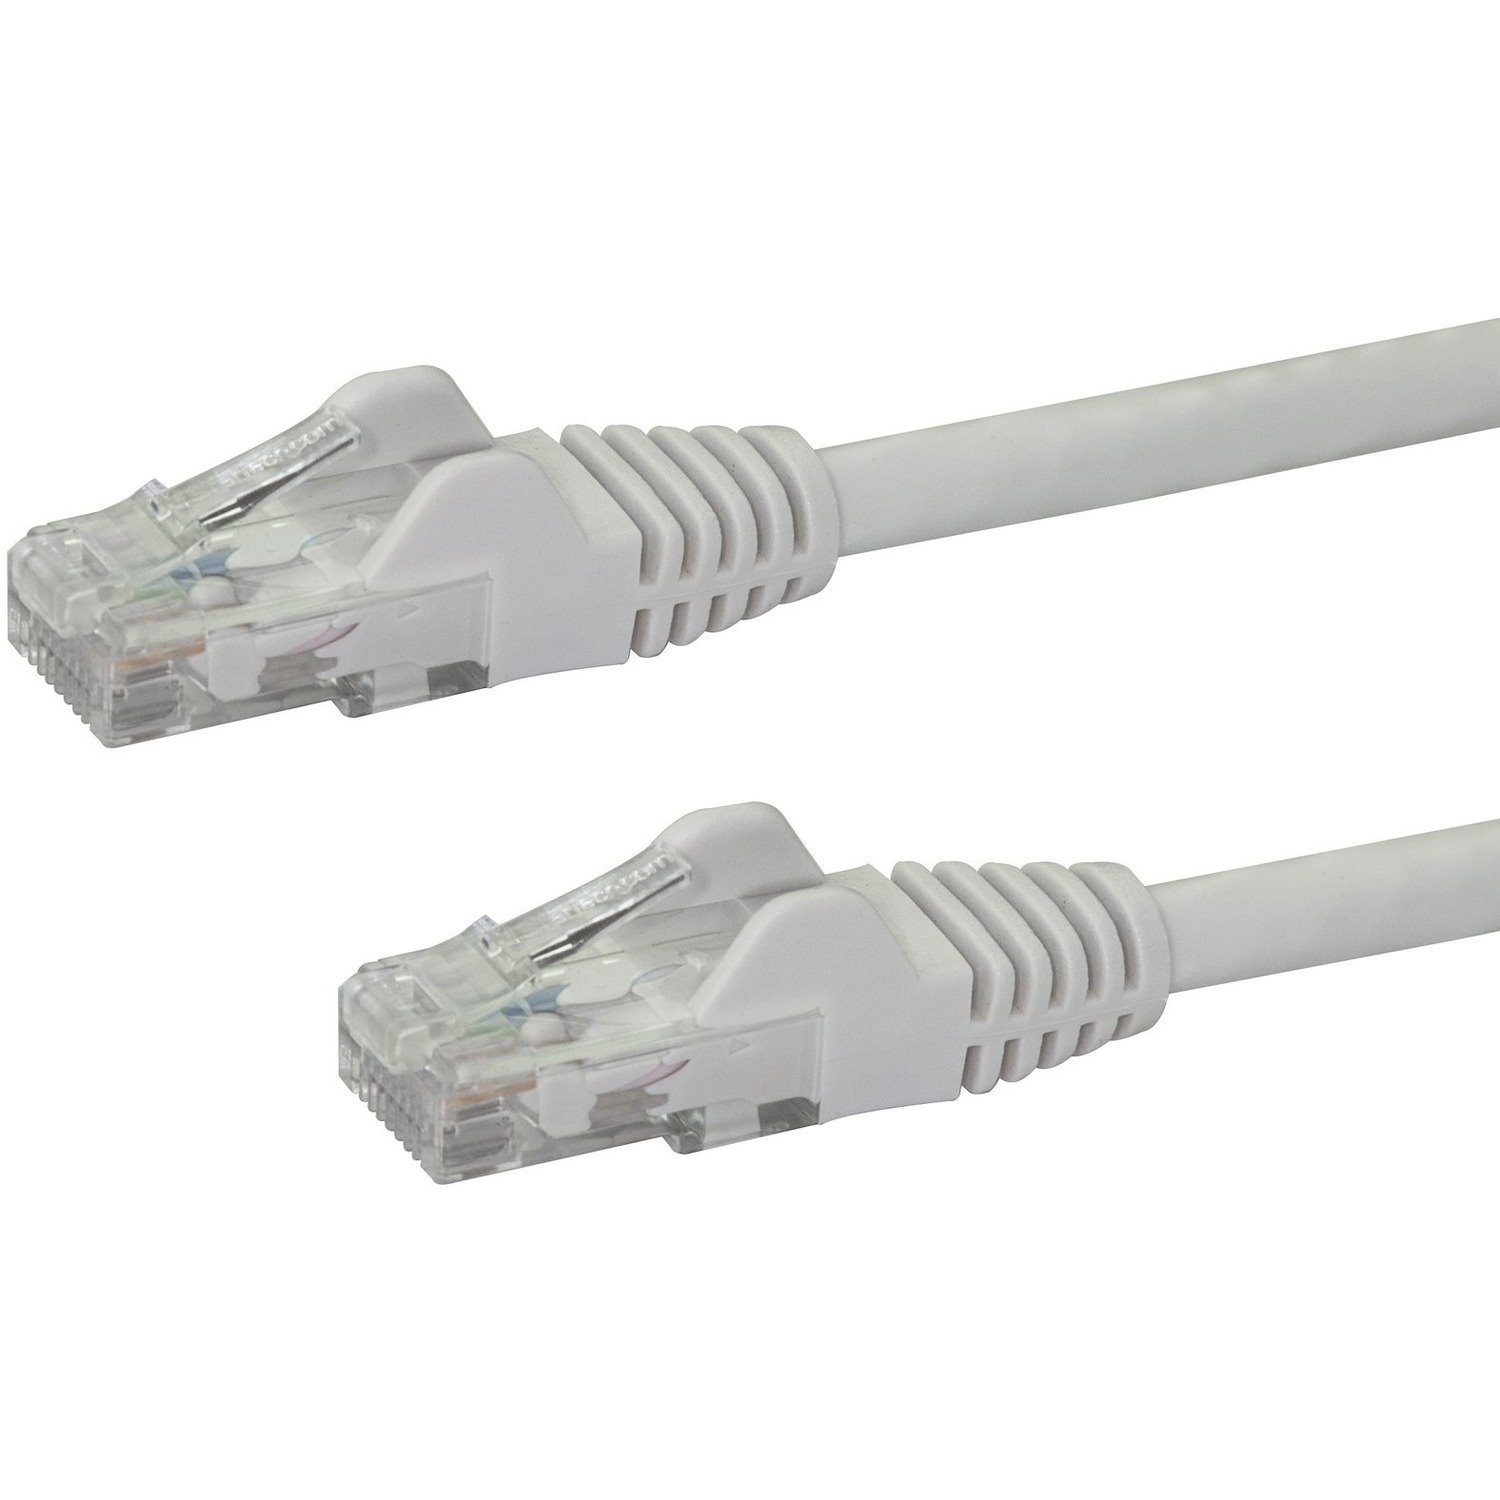 StarTech.com 2 m Category 6 Network Cable for Network Device - 1